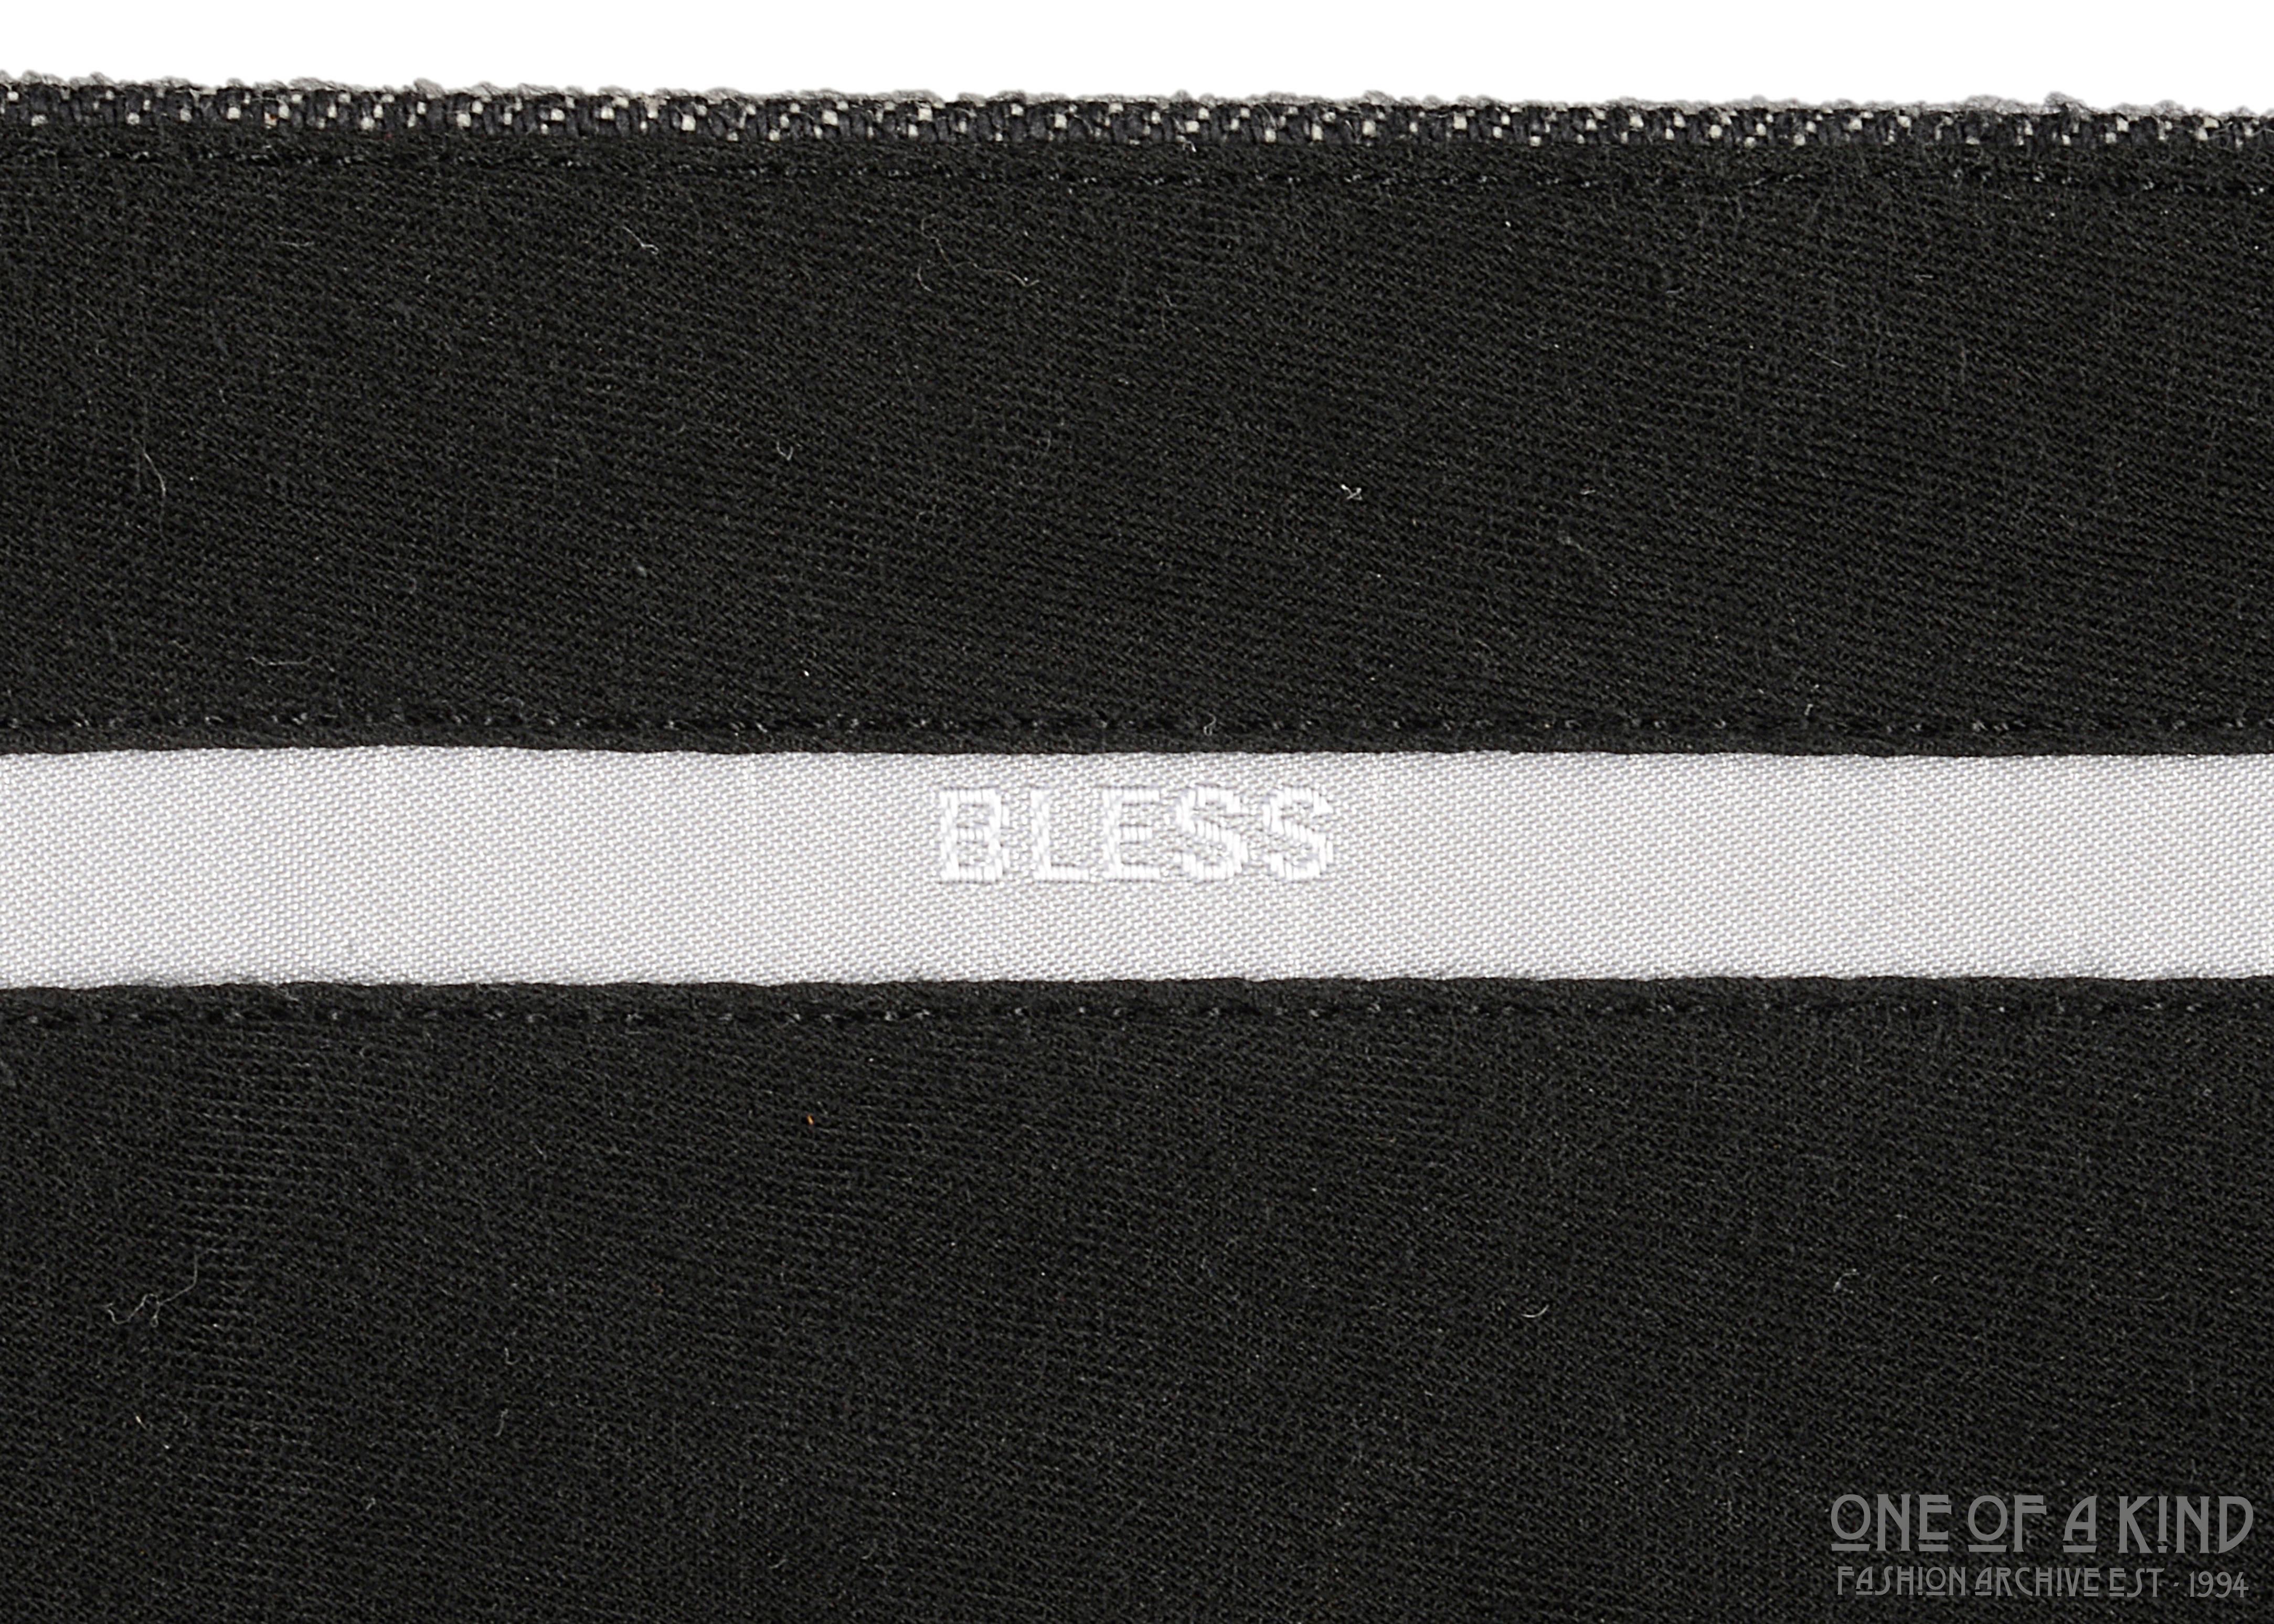 Black BLESS N° 34 black denim jeans with attached lycra tights